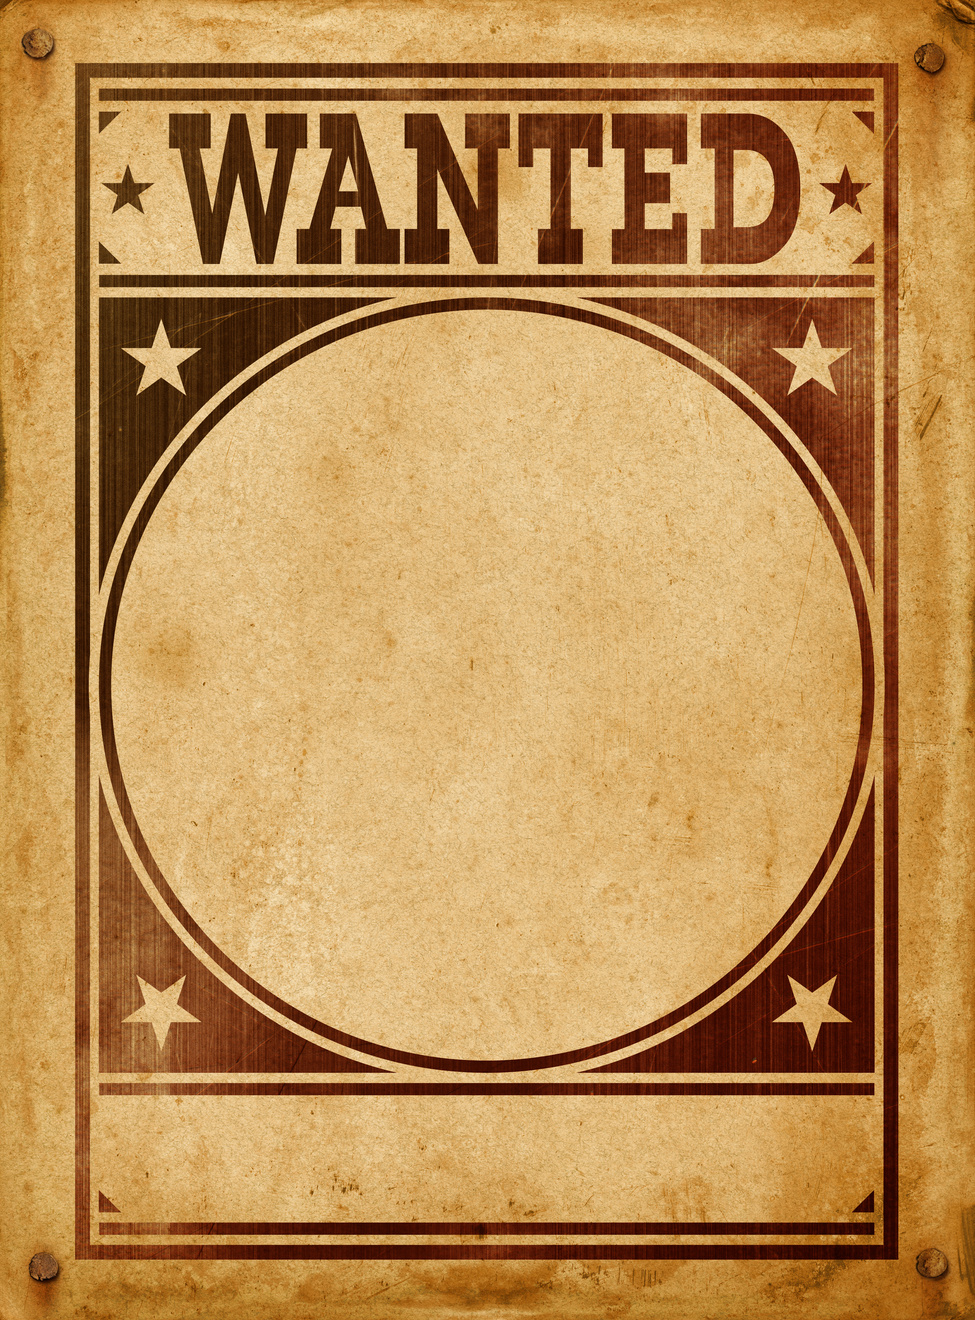 Wanted Poster Illustration